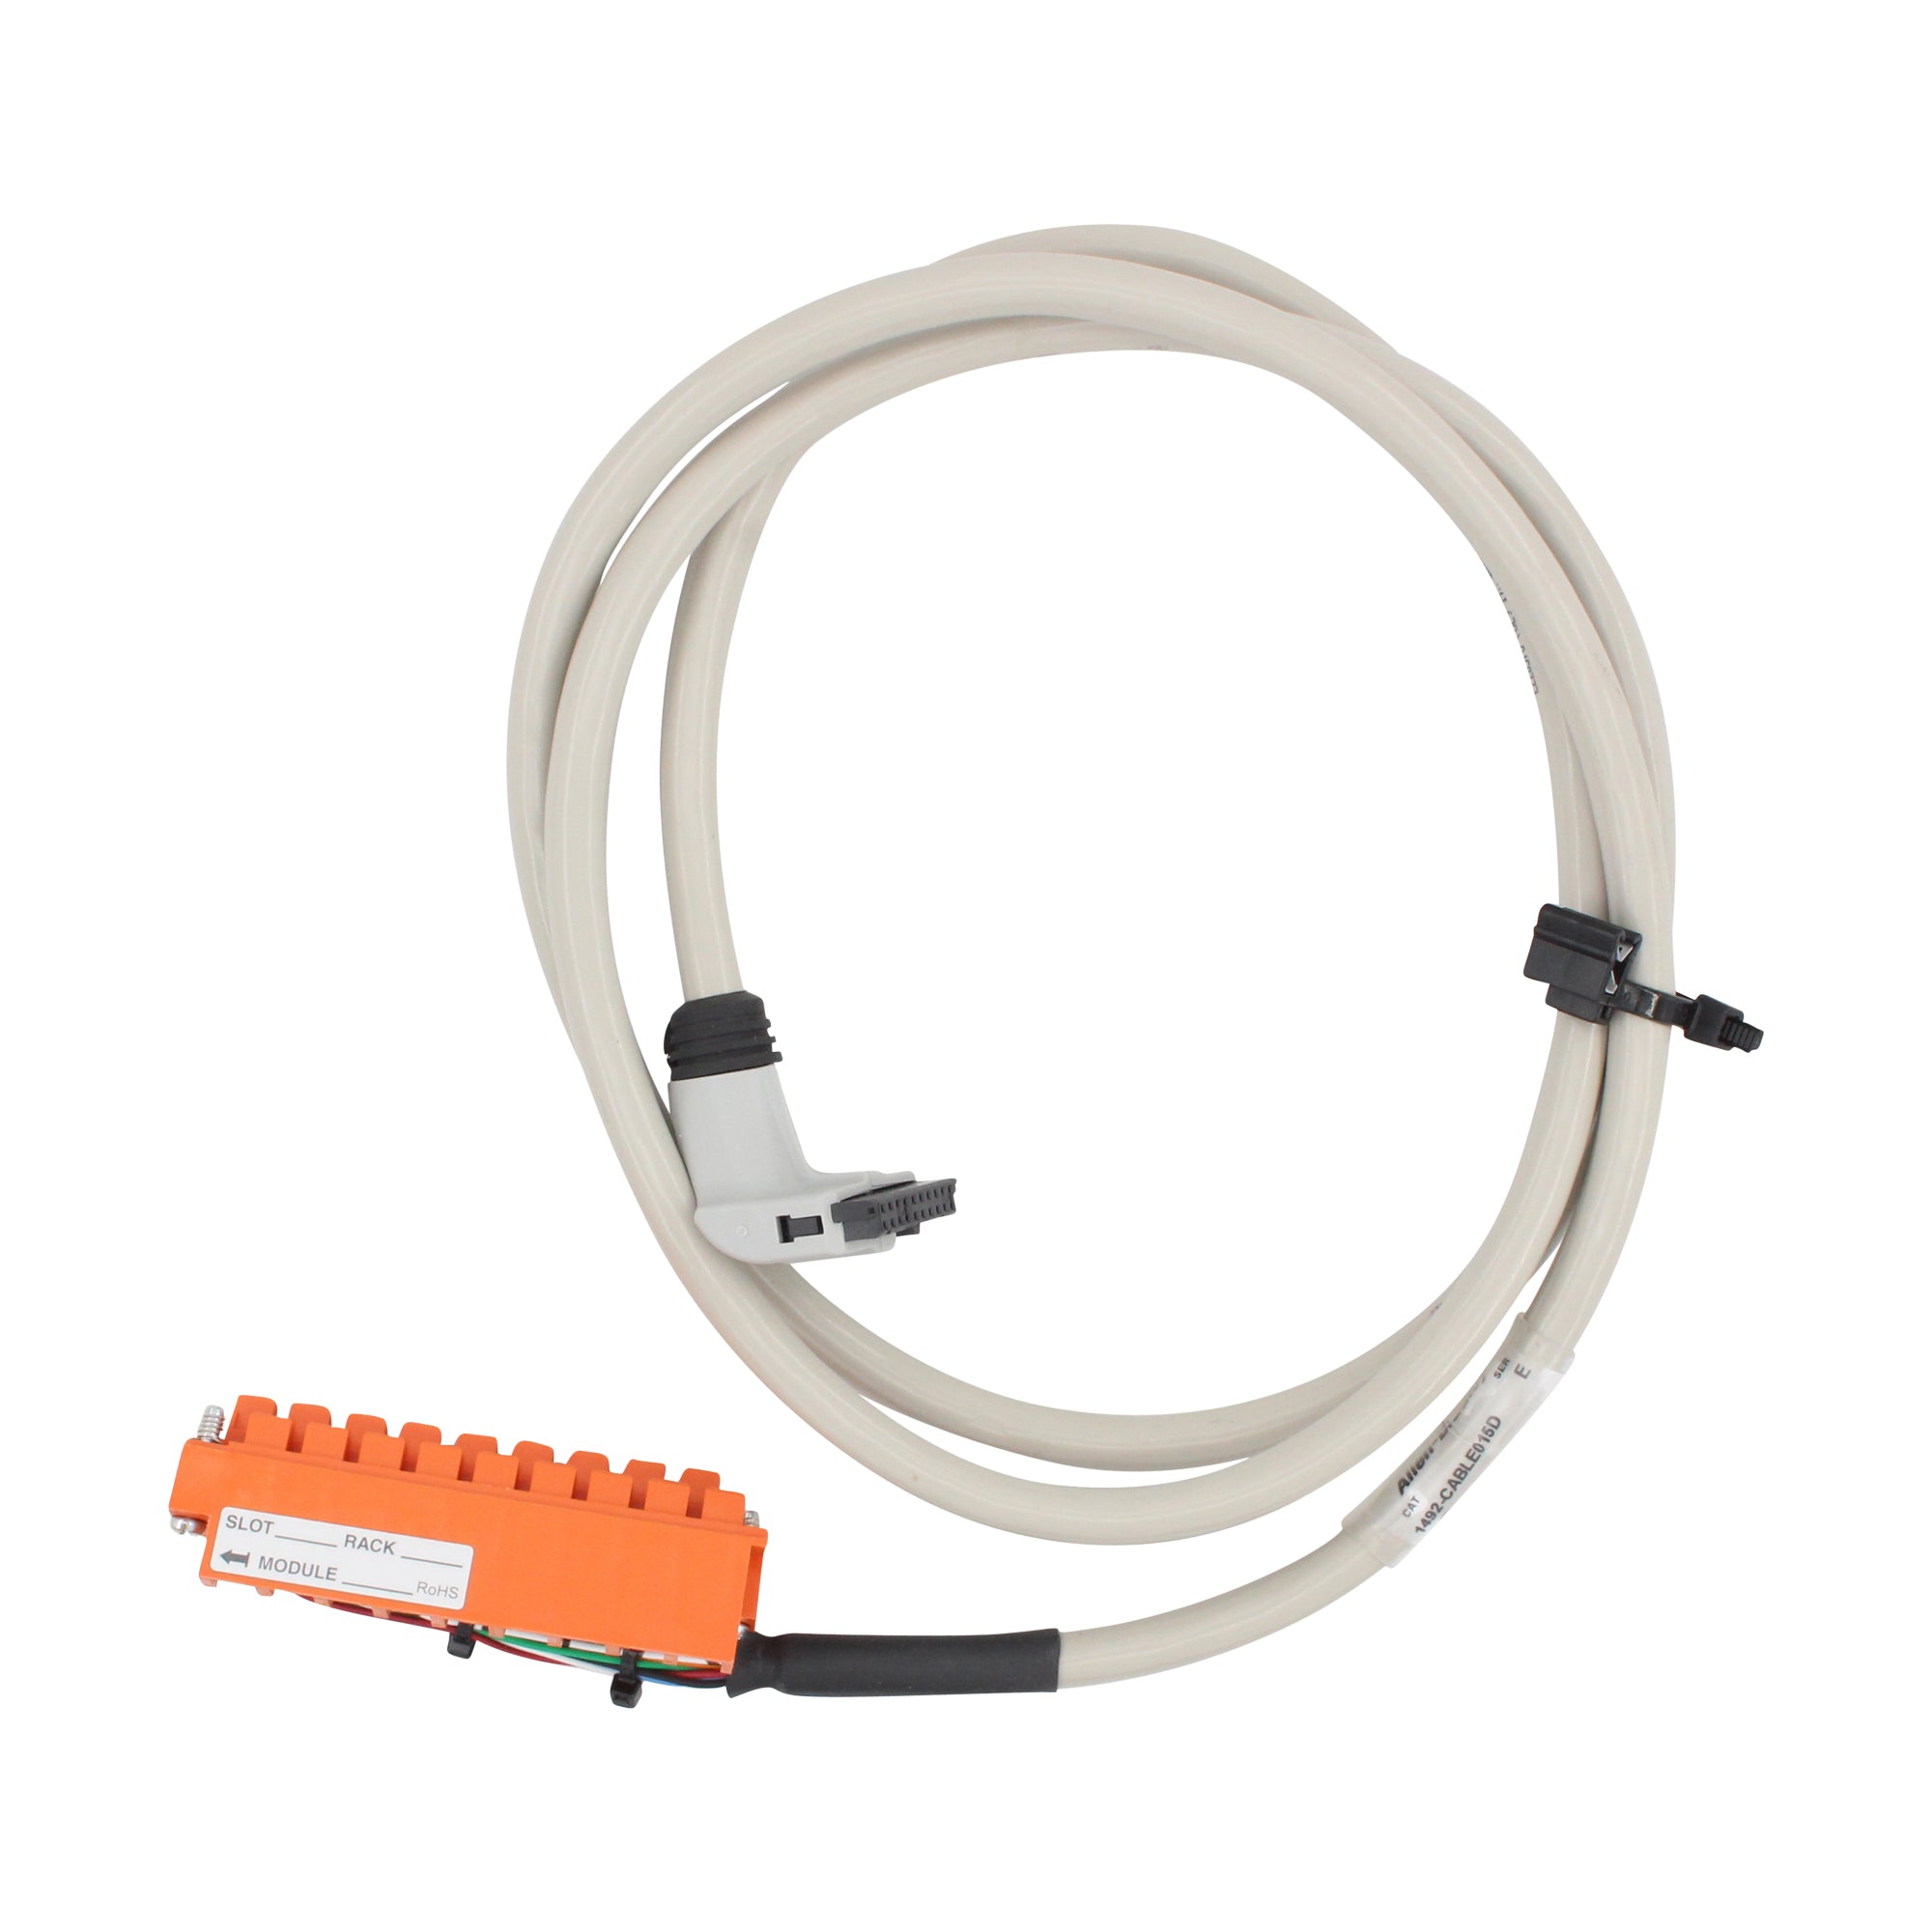 Allen Bradley Group, ALLEN BRADLEY 1492-CABLE015D PRE-WIRED CABLE FOR 1746 DIGITAL I/O, 1.5-METER